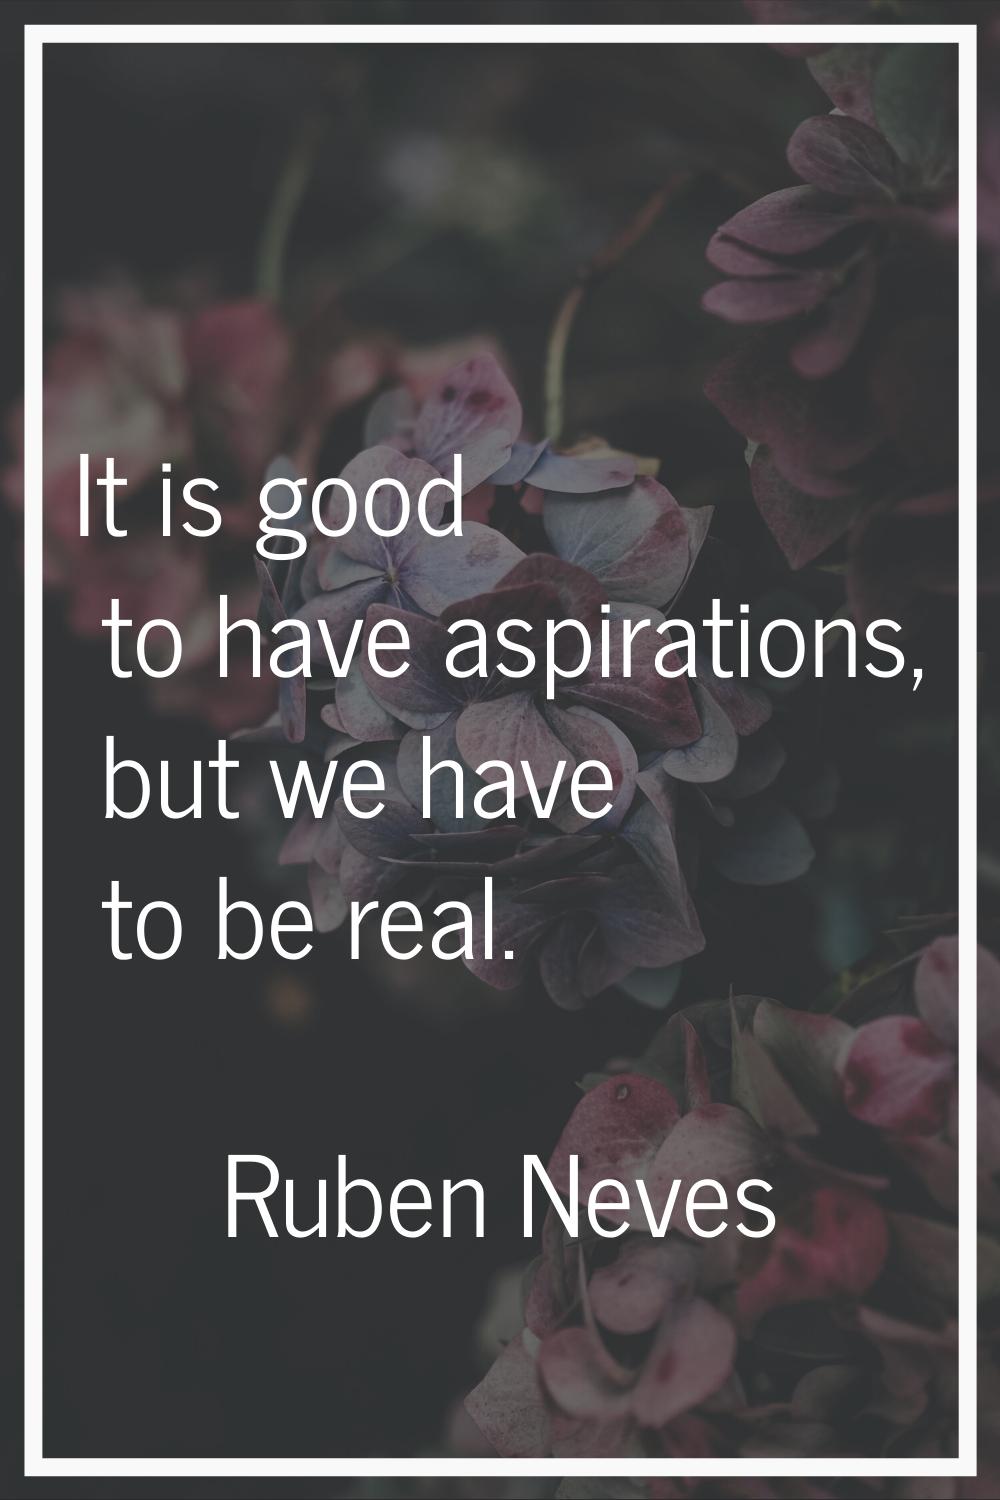 It is good to have aspirations, but we have to be real.